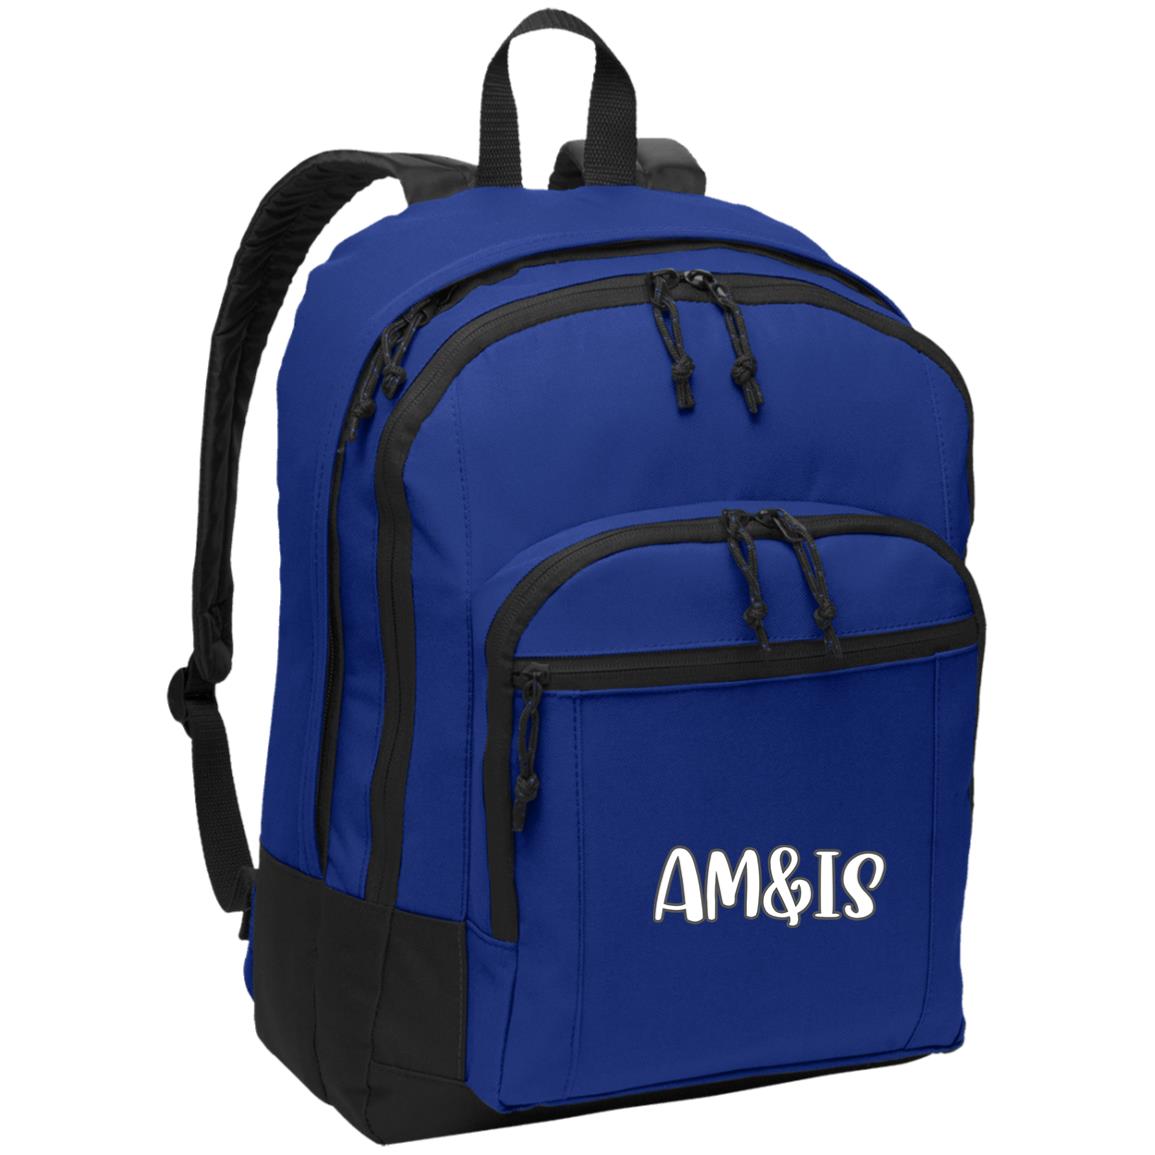 TWILIGHT BLUE ONE SIZE - AM&IS Activewear Basic Backpack - Backpacks at TFC&H Co.